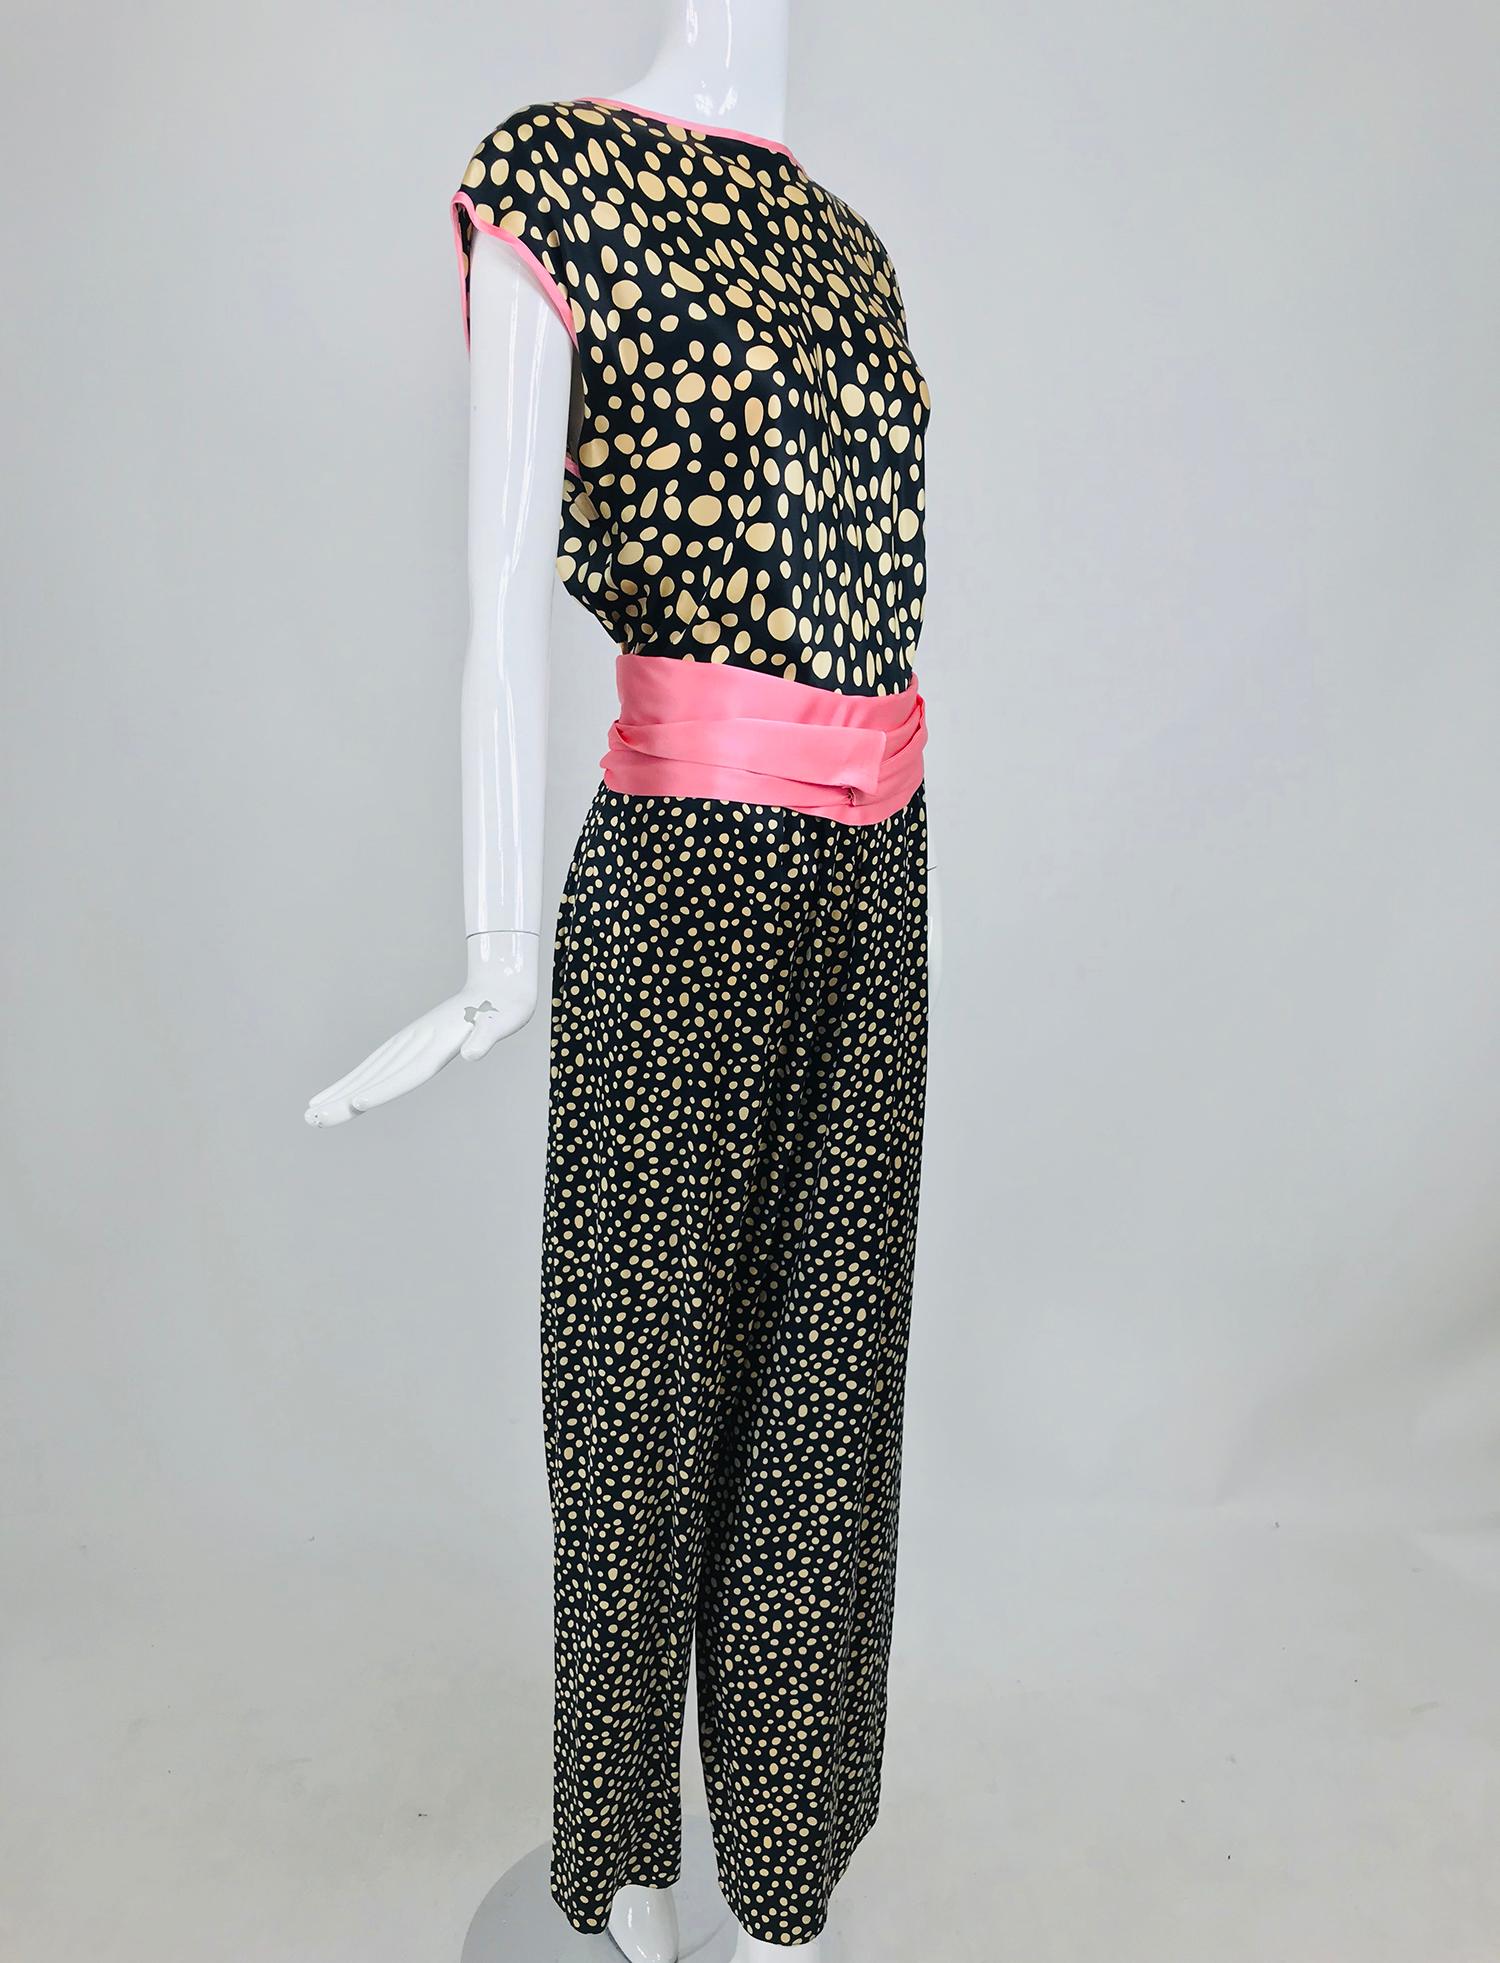 Guy Laroche Silk Evening Pajama set in Cream and Black Dots Pink Trim 1990s In Excellent Condition For Sale In West Palm Beach, FL